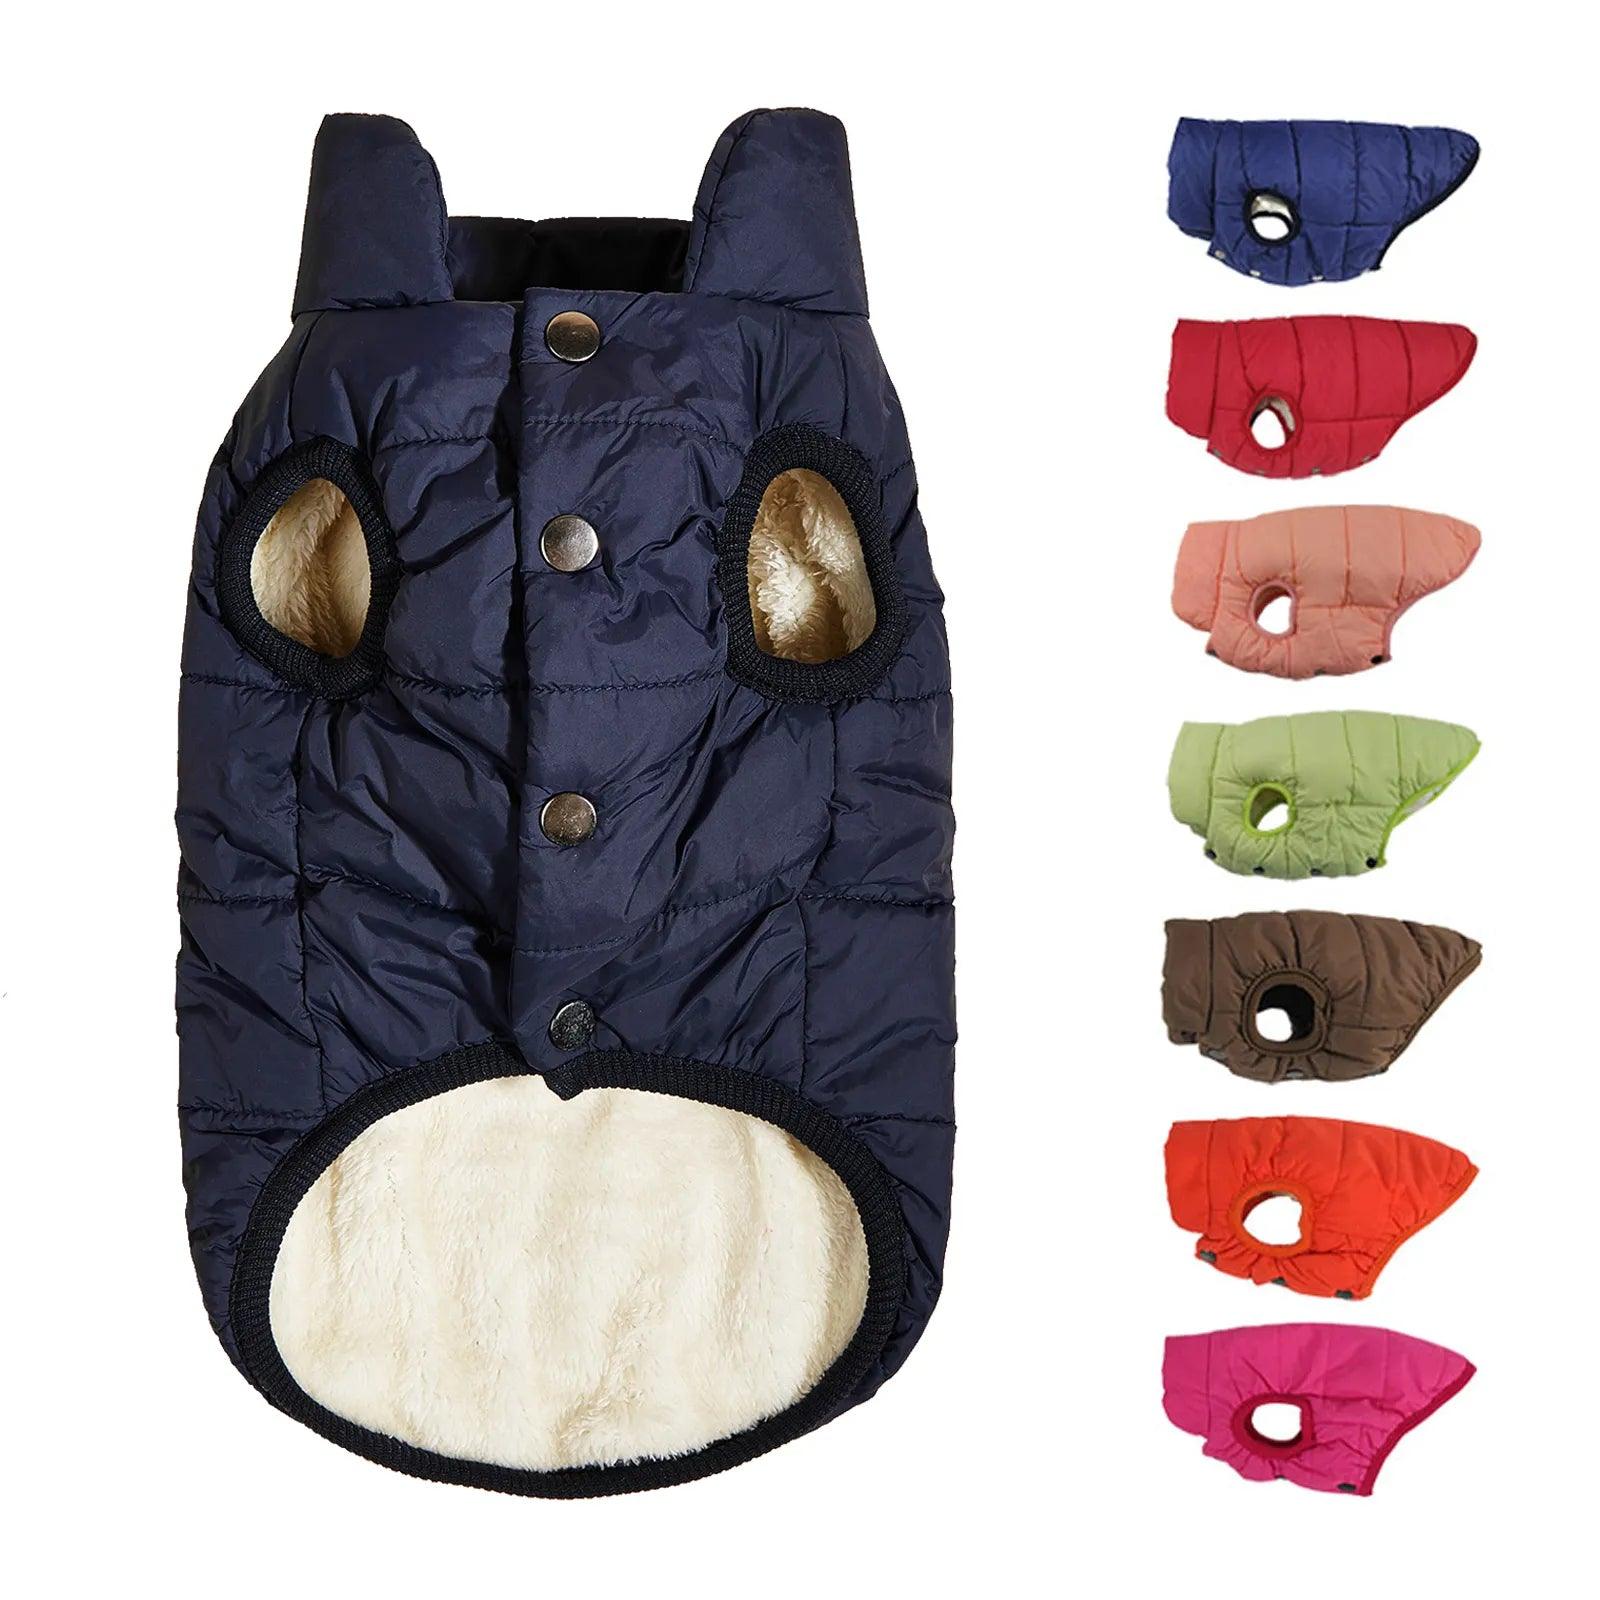 Winter Pup Warmer: Stylish Fleece-Lined Dog Jacket for Cold Weather  ourlum.com   